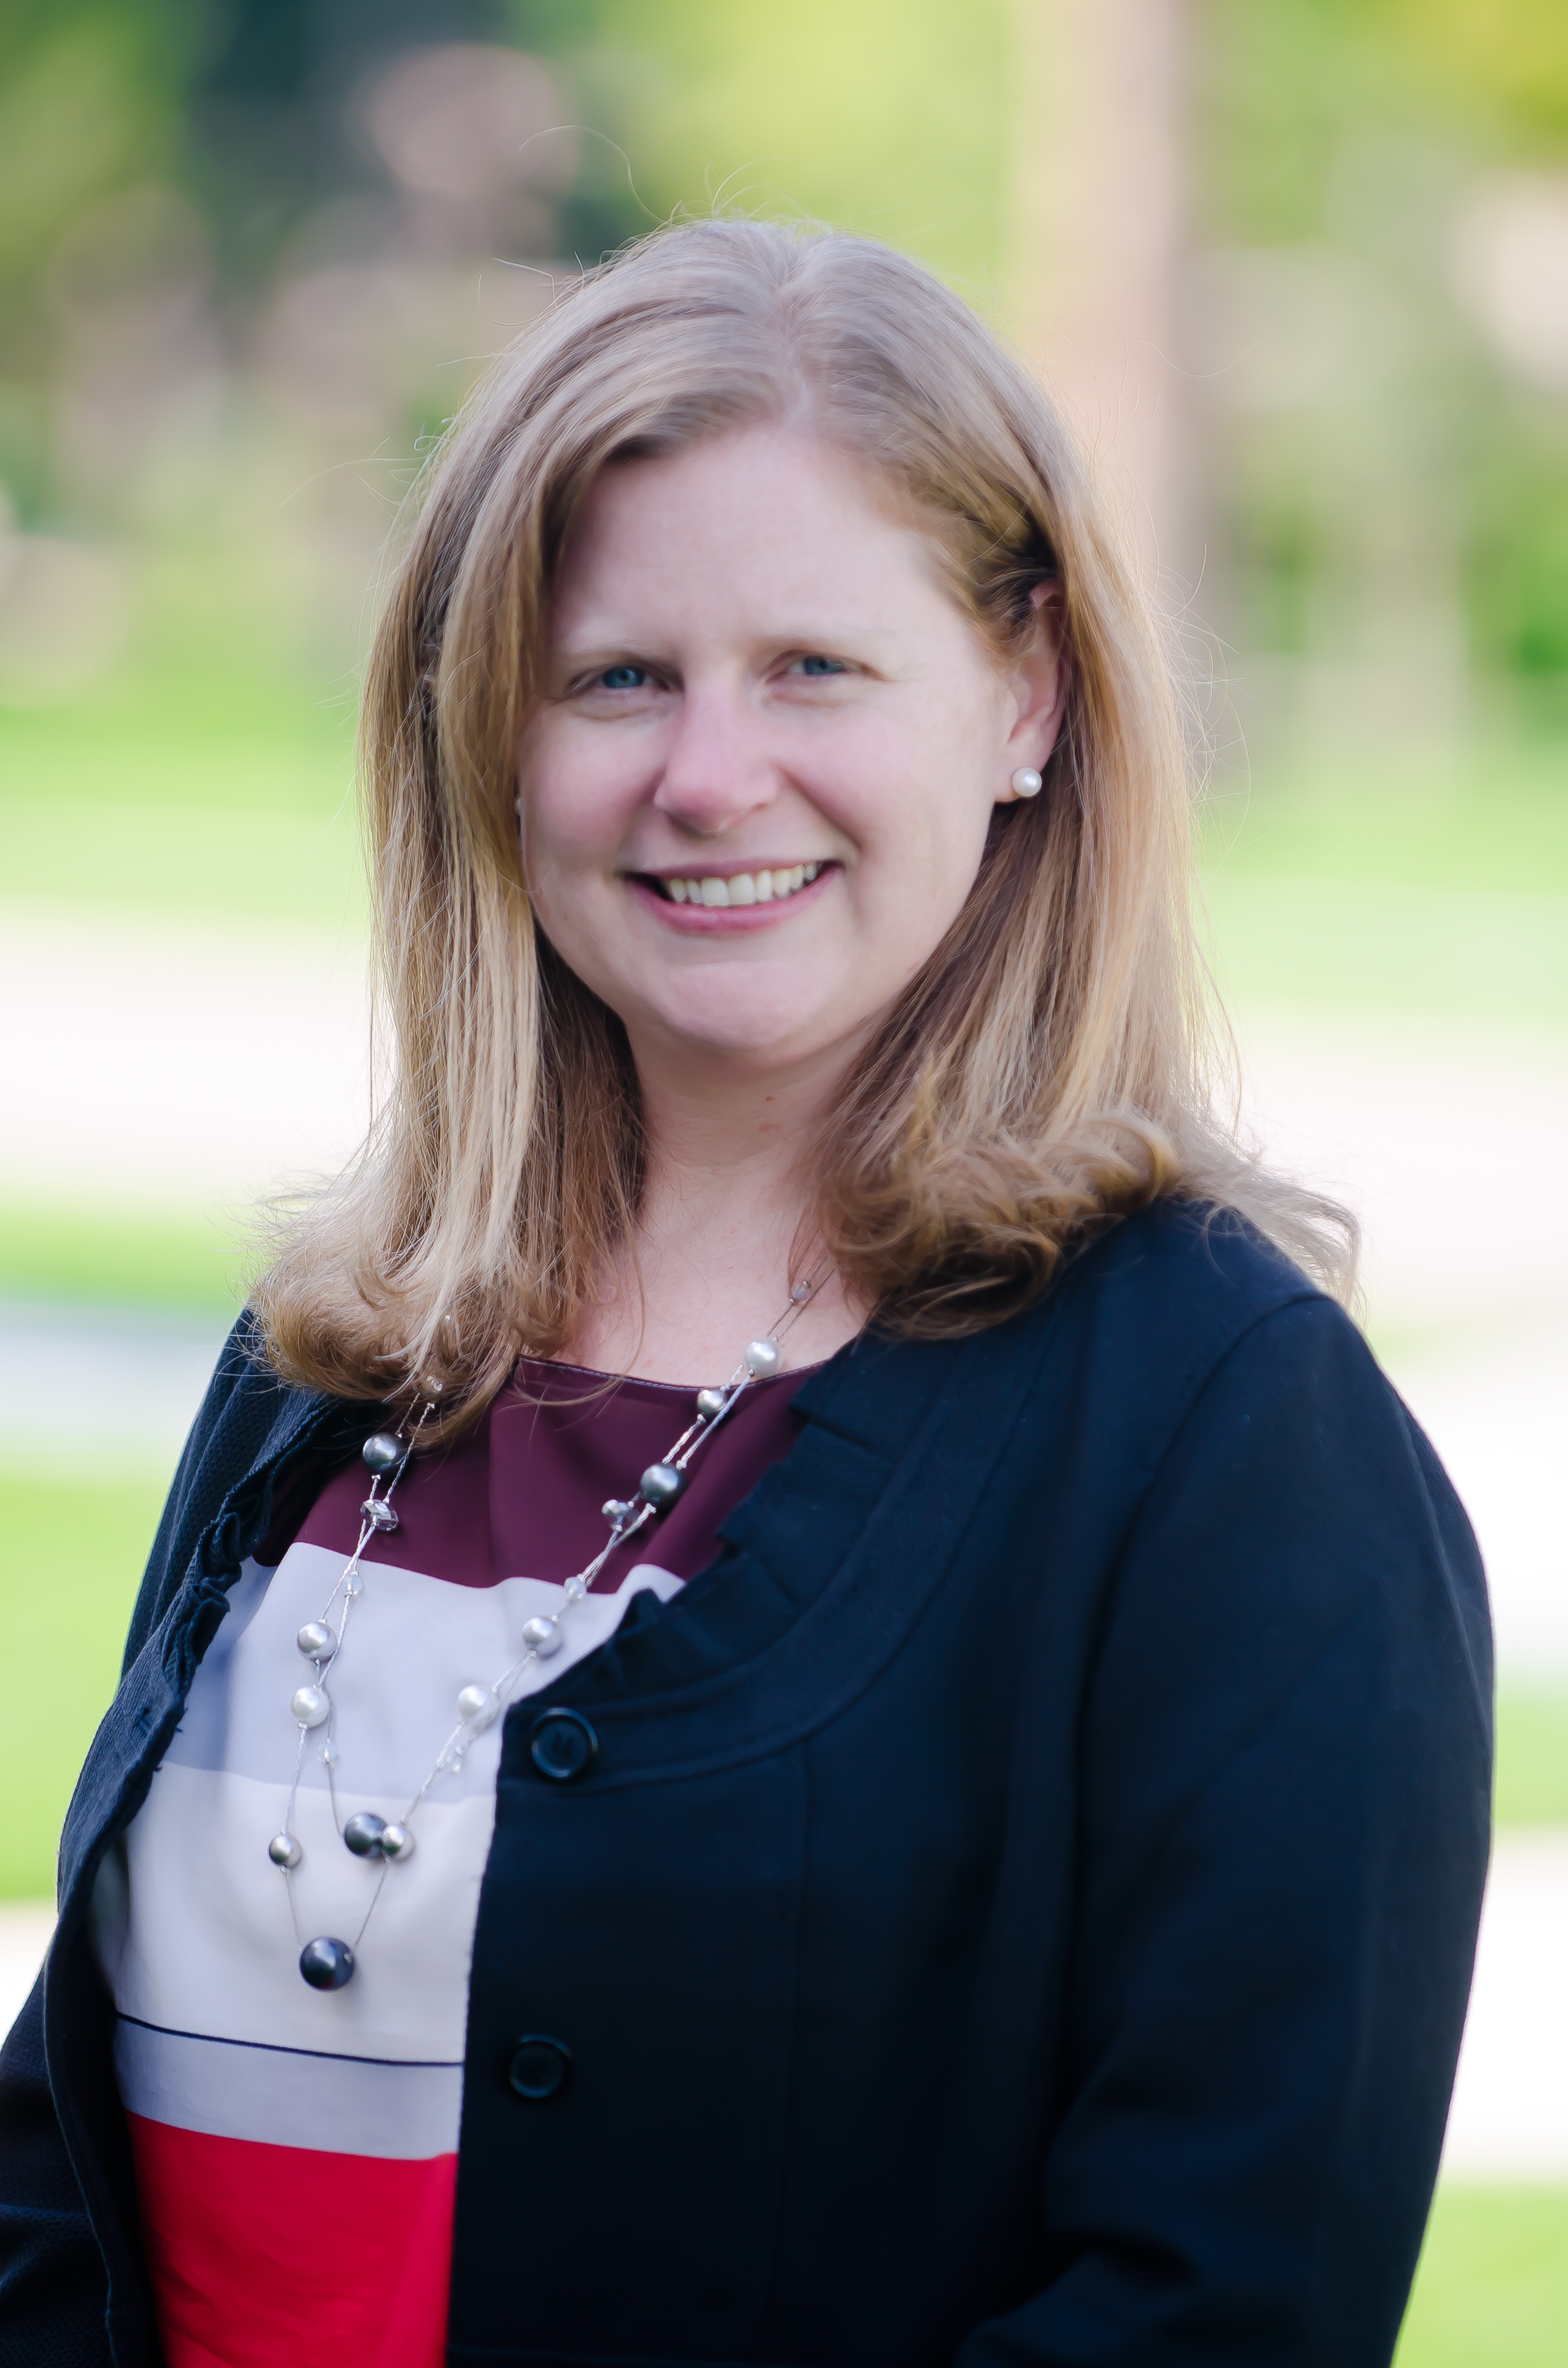 photo of becky konowicz dean of admission she is a white woman with strawberry blond hair she is wearing a long necklace with pearls, a silk shirt that is pink, white and maroon striped, and a blue back with collar ruffles